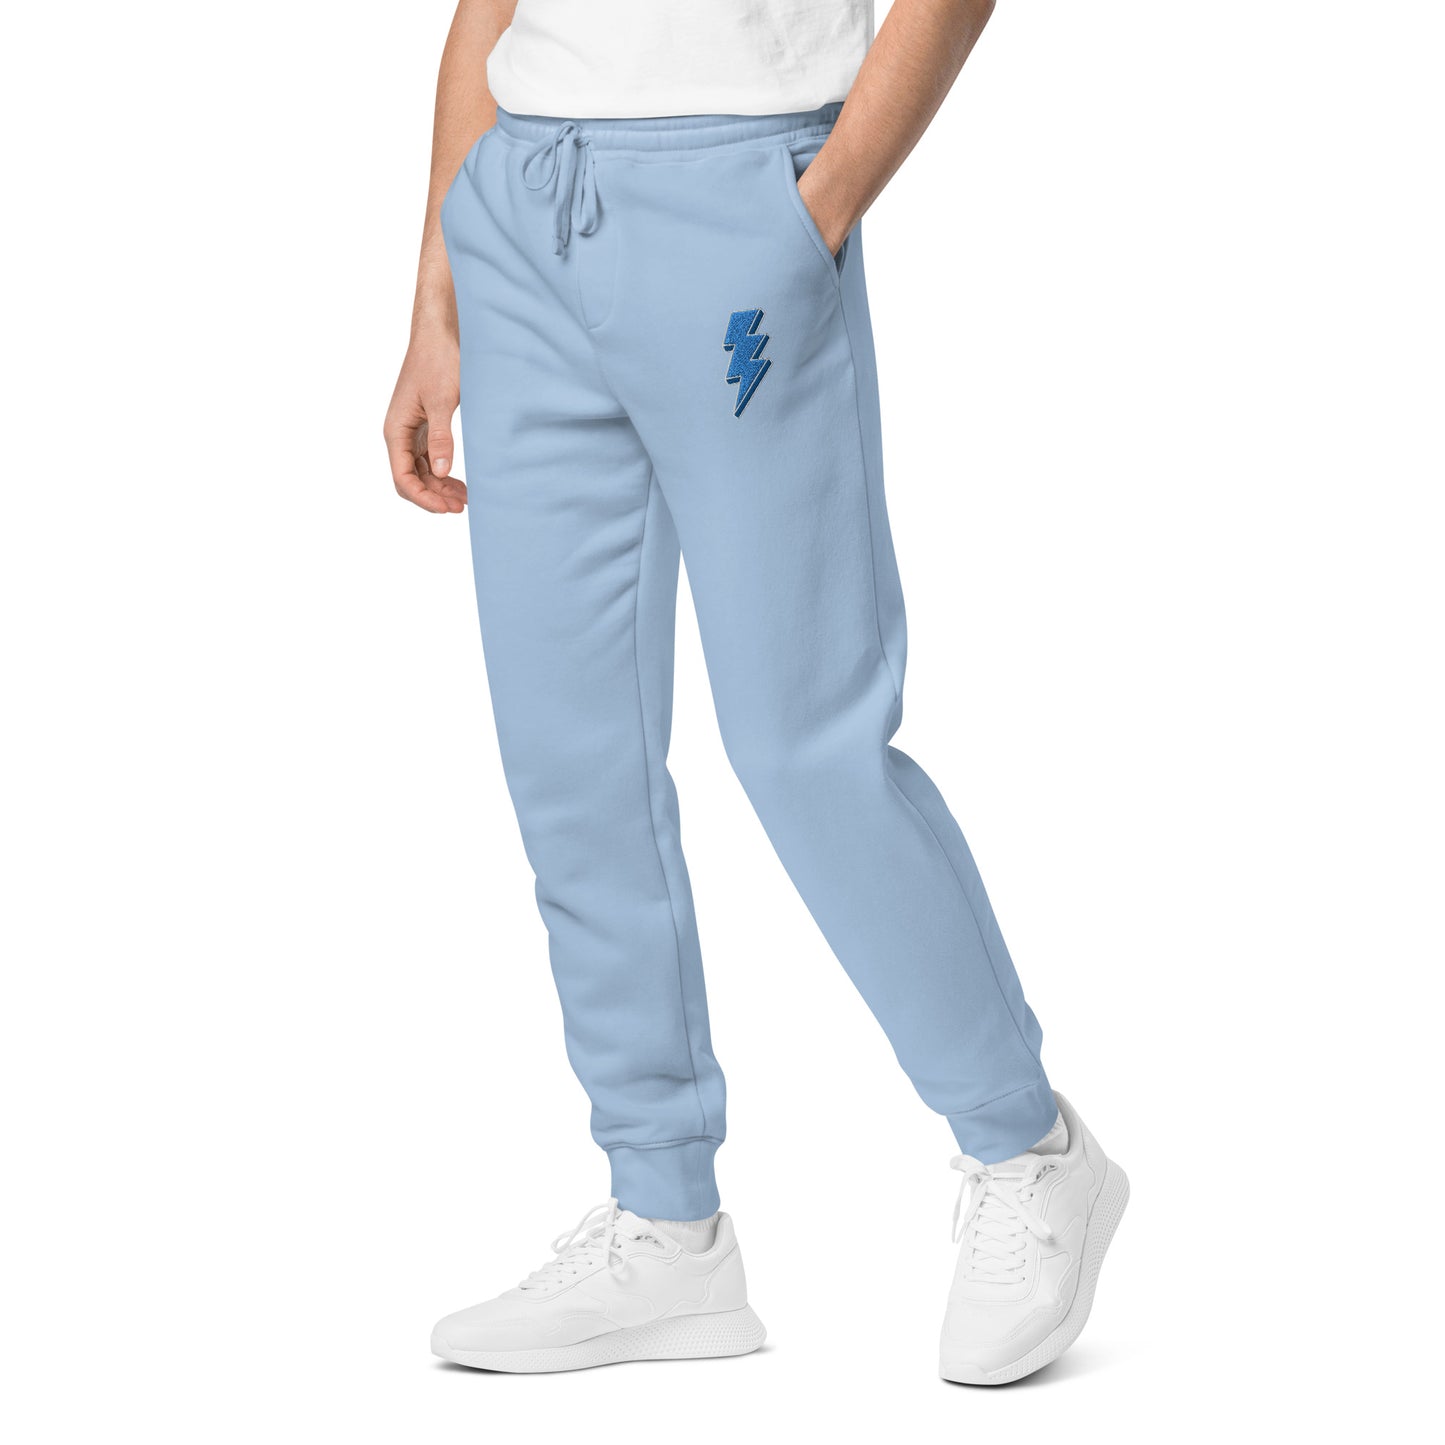 Blue Lightning Unisex pigment-dyed sweatpants Embroidery